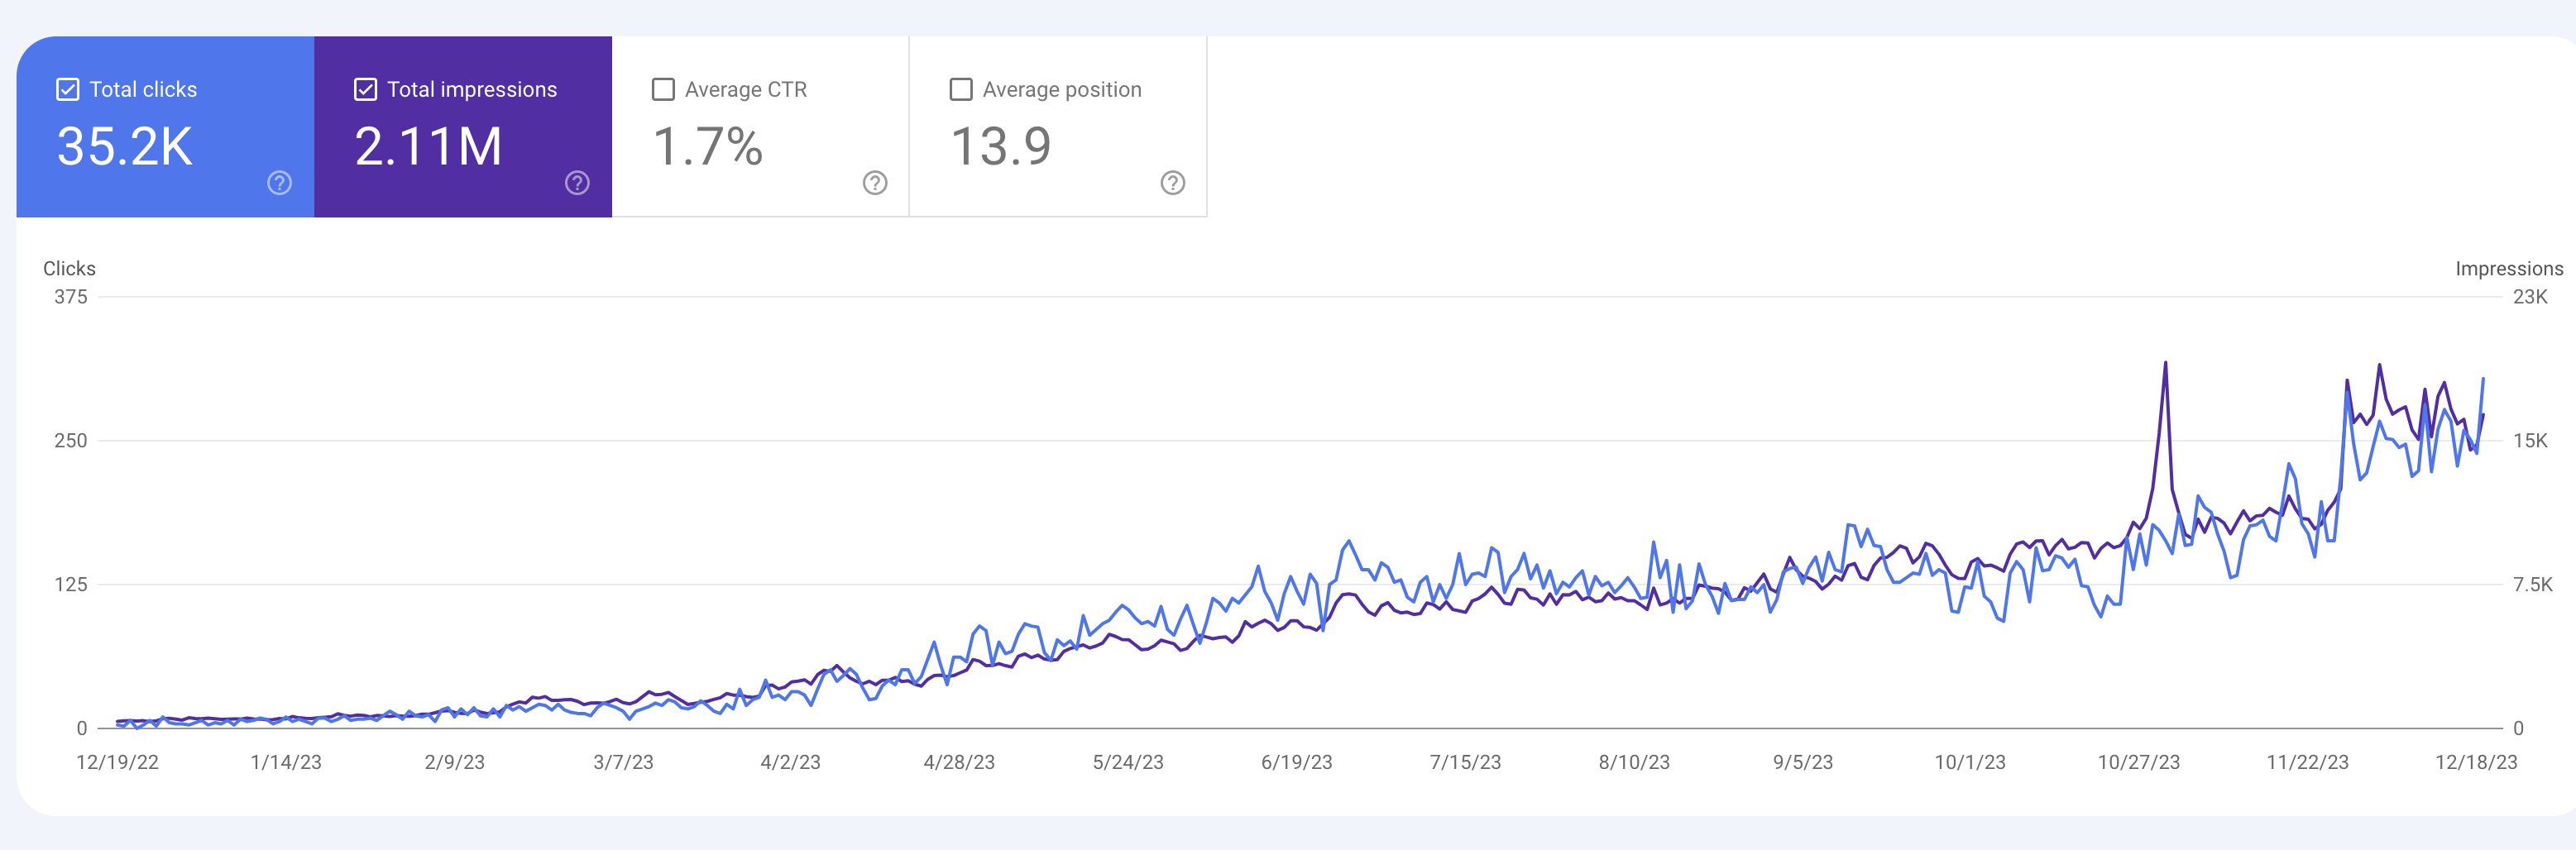 Proper installation of Google Search Console to monitor the SEO progress of an immigration lawyer.